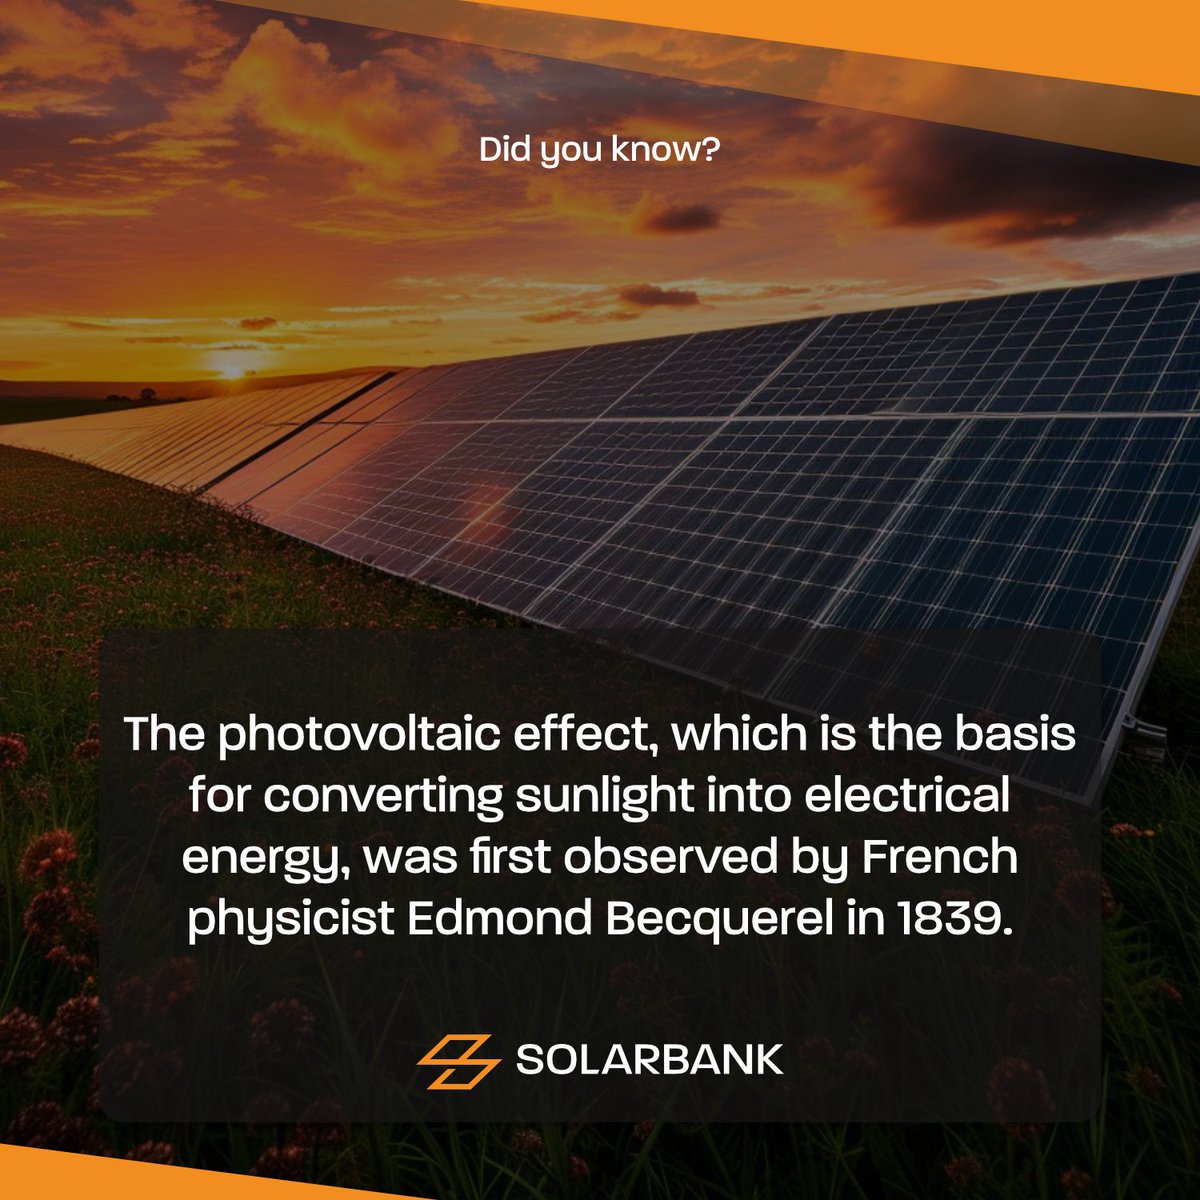 Discovery of the Photovoltaic Effect

#solarfacts #didyouknow #solarhistory #energy